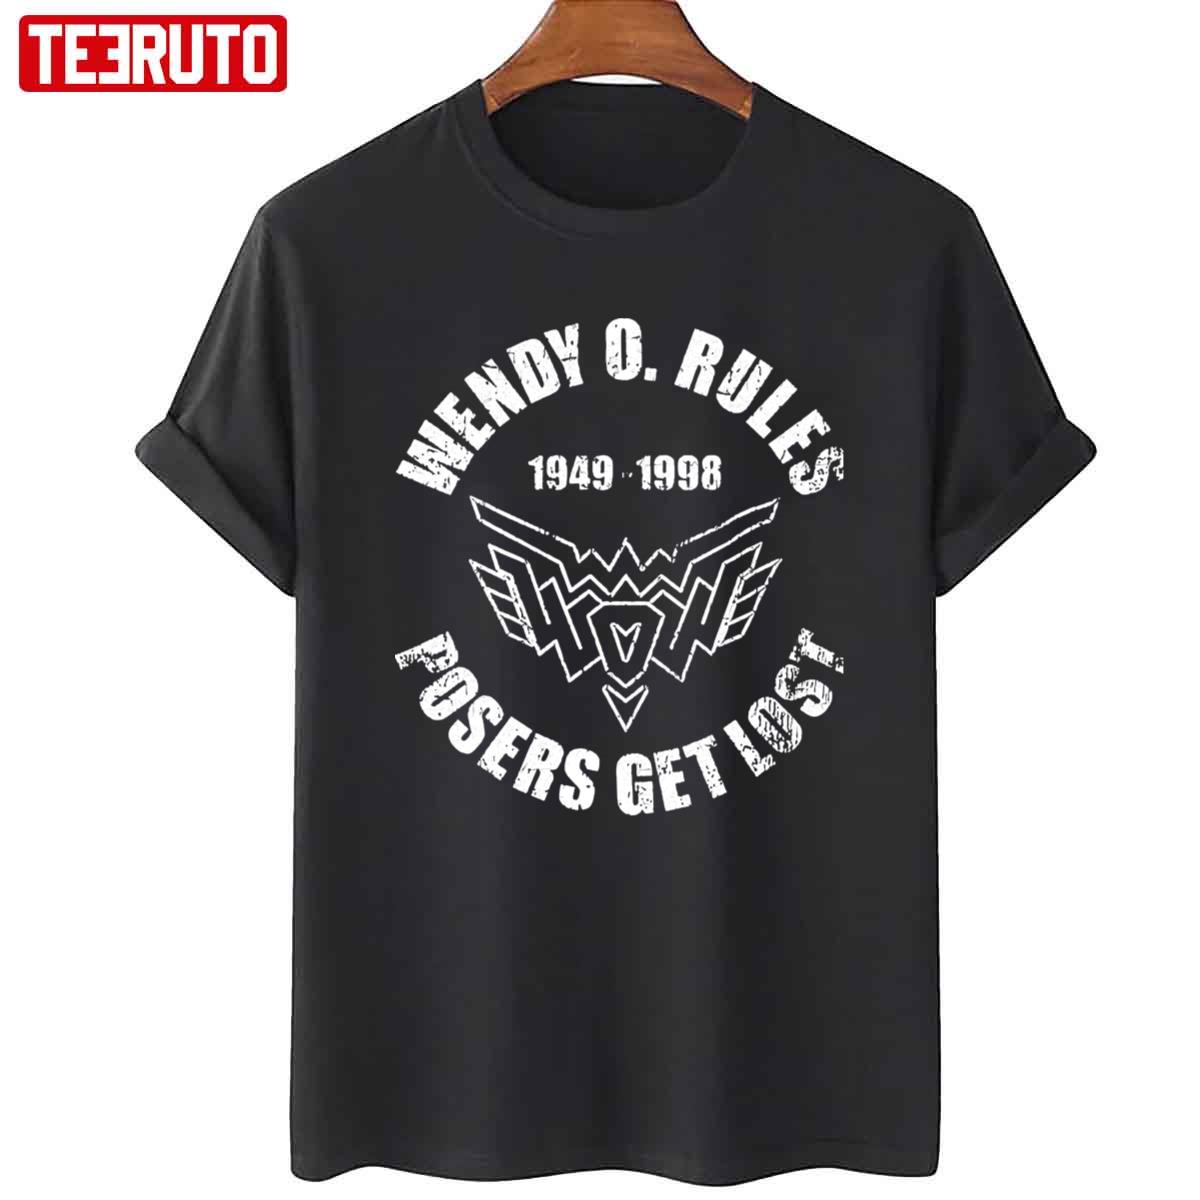 1949 1998 Wendy O Rules Posers Get Lost Unisex T-Shirt